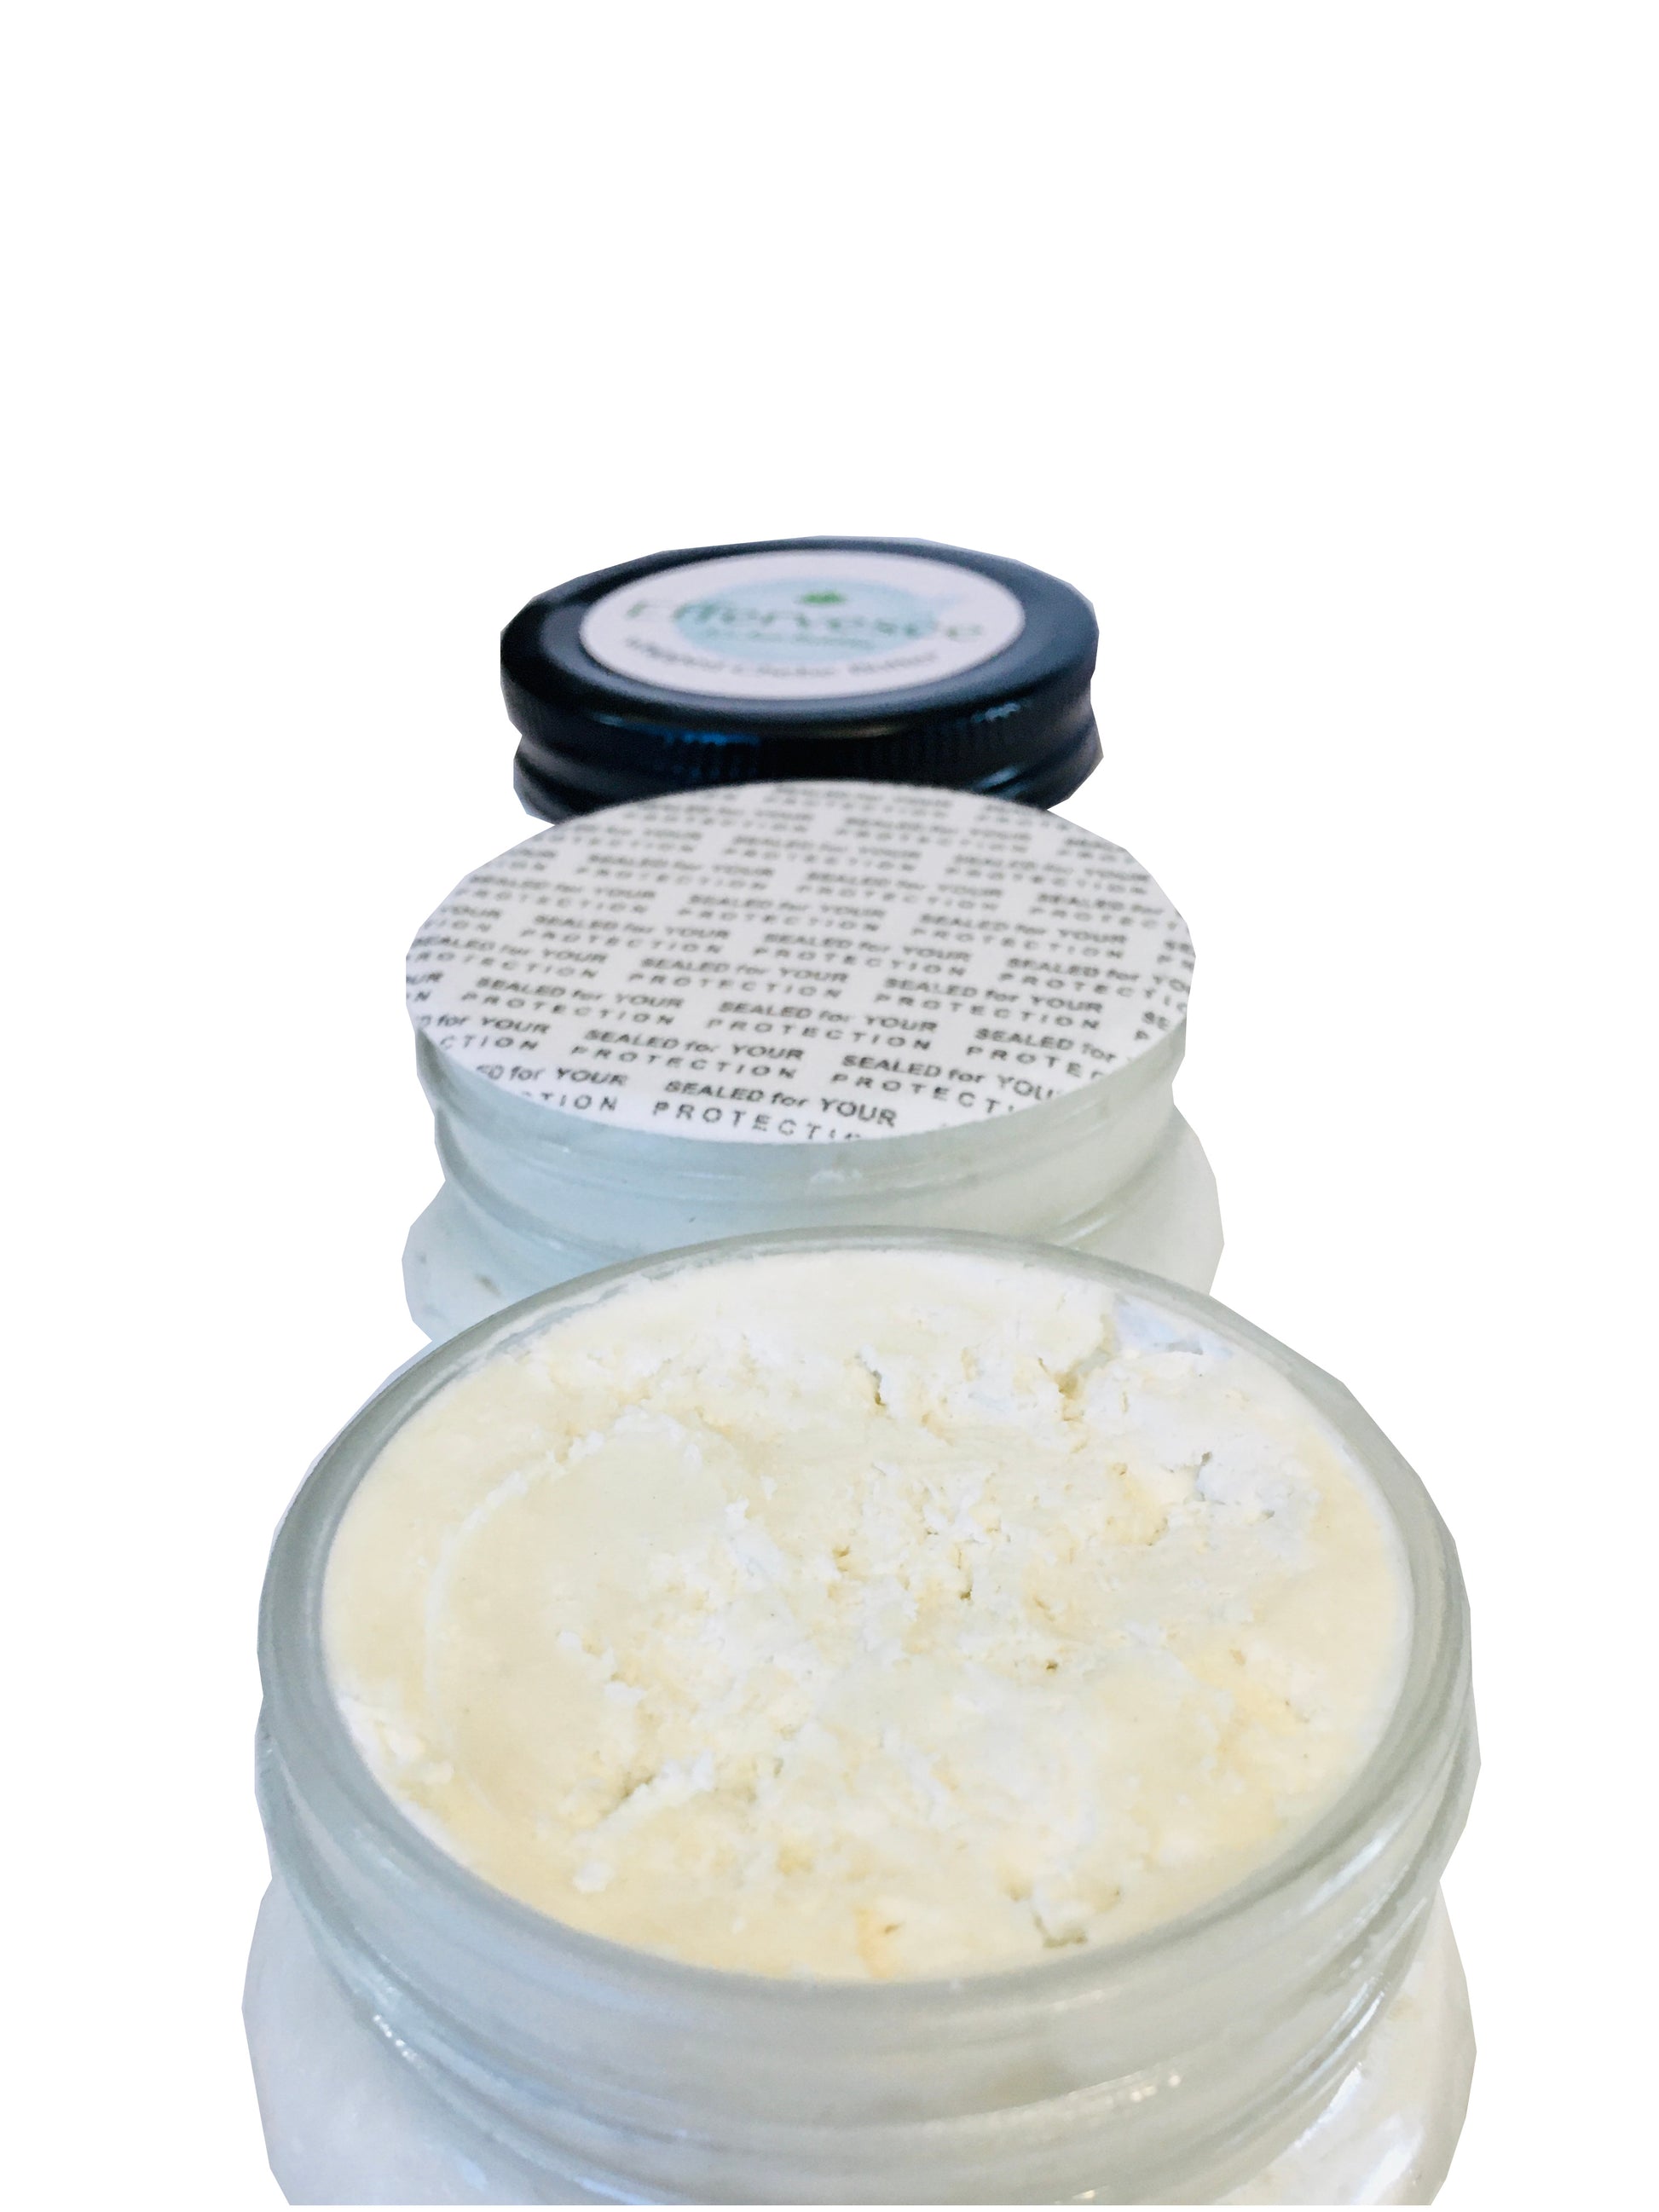 Whipped Chebe Butter for Hair - Strengthen and Grow, Effervesce.ItsJustBubbles, Whipped Butter, whipped-chebe-butter-for-hair-strengthen-and-grow, avocado oil, beeswax, butter, castor, chebe 